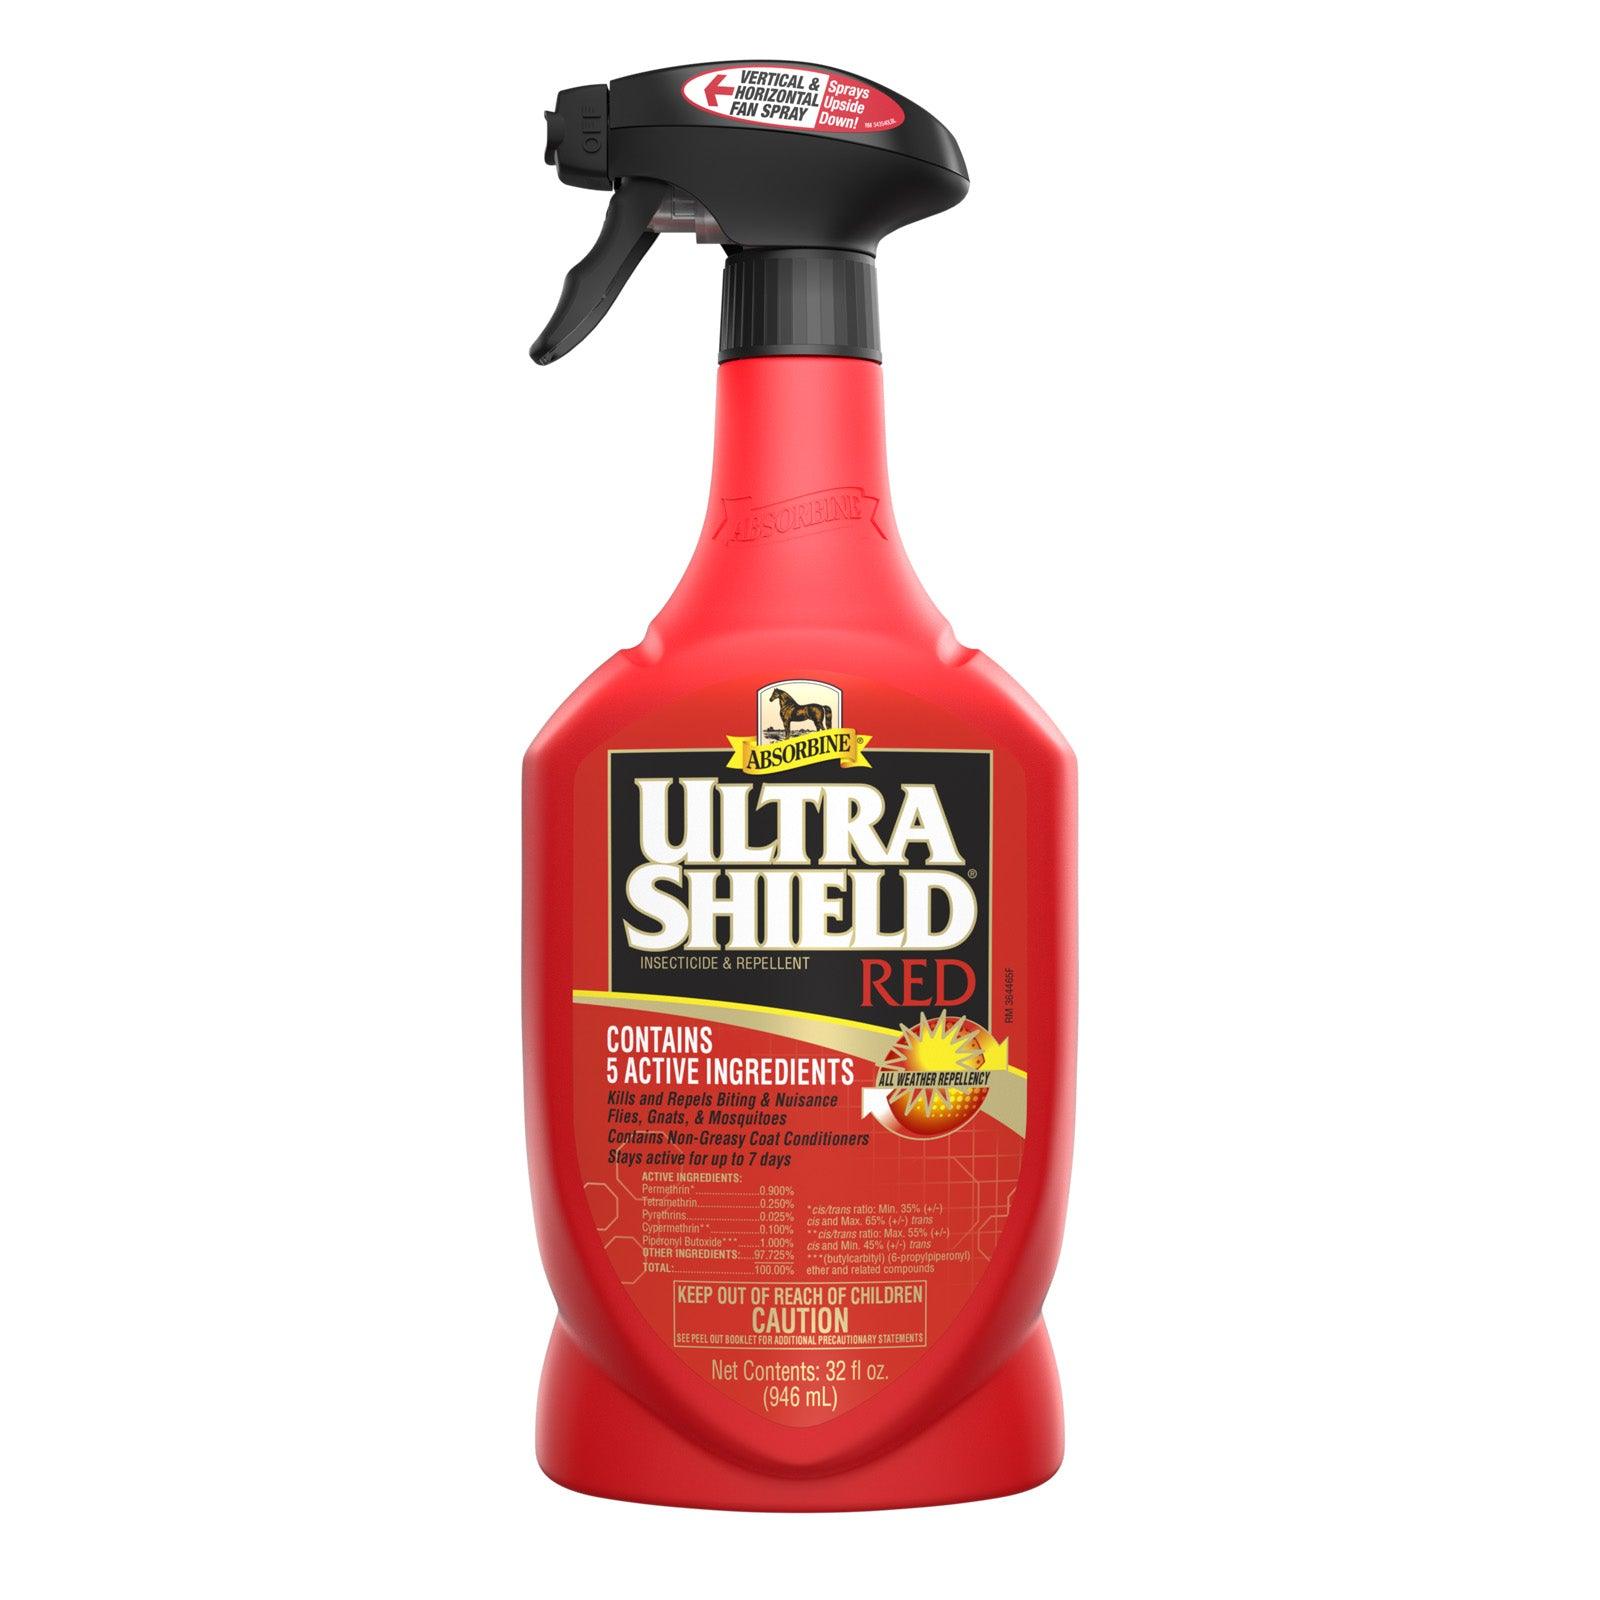 UltrShield Red insecticide & repellent quart sprayer bottle contains 5 active ingredients. Kills and repels biting & nuisance flies, gnats & mosquitos. Contains coat conditioners, stays active for up to 7 days.